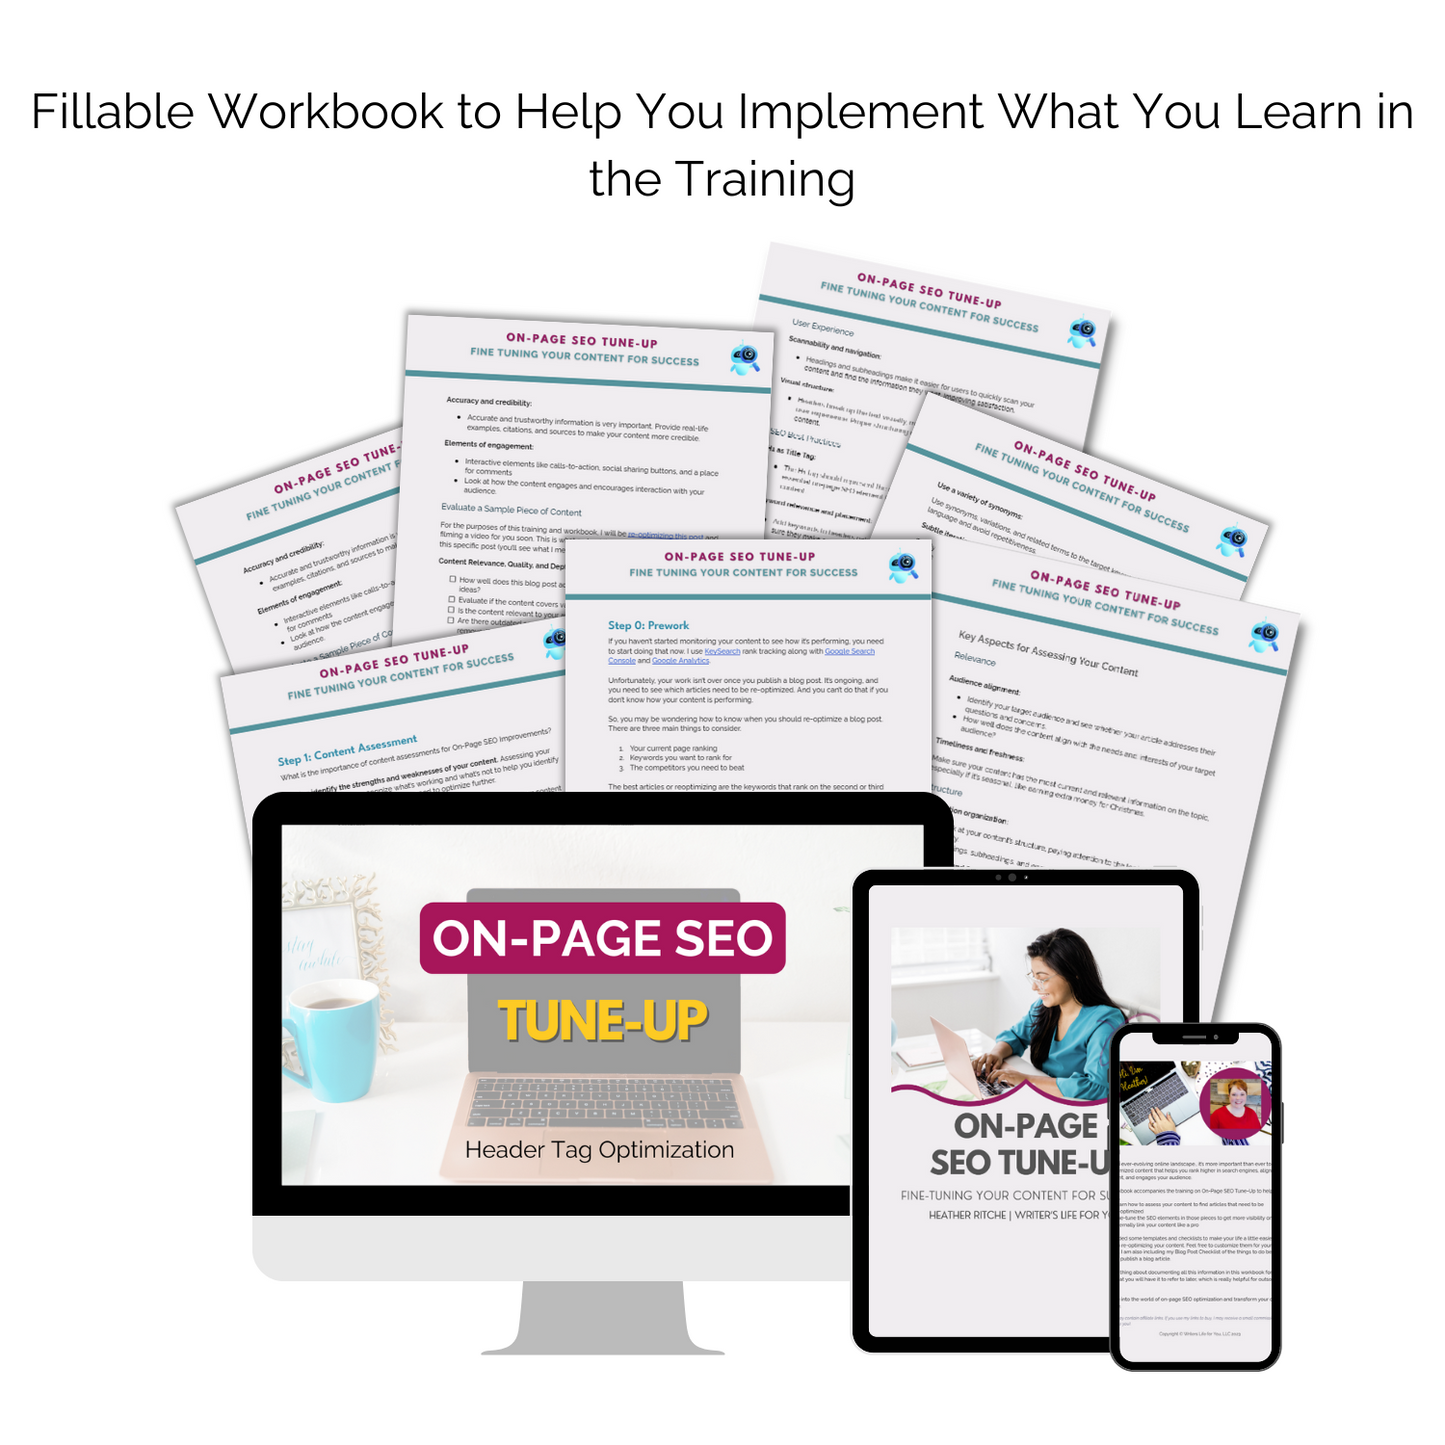 On-Page SEO Tune-Up fillable workbook to help you implement what you learn